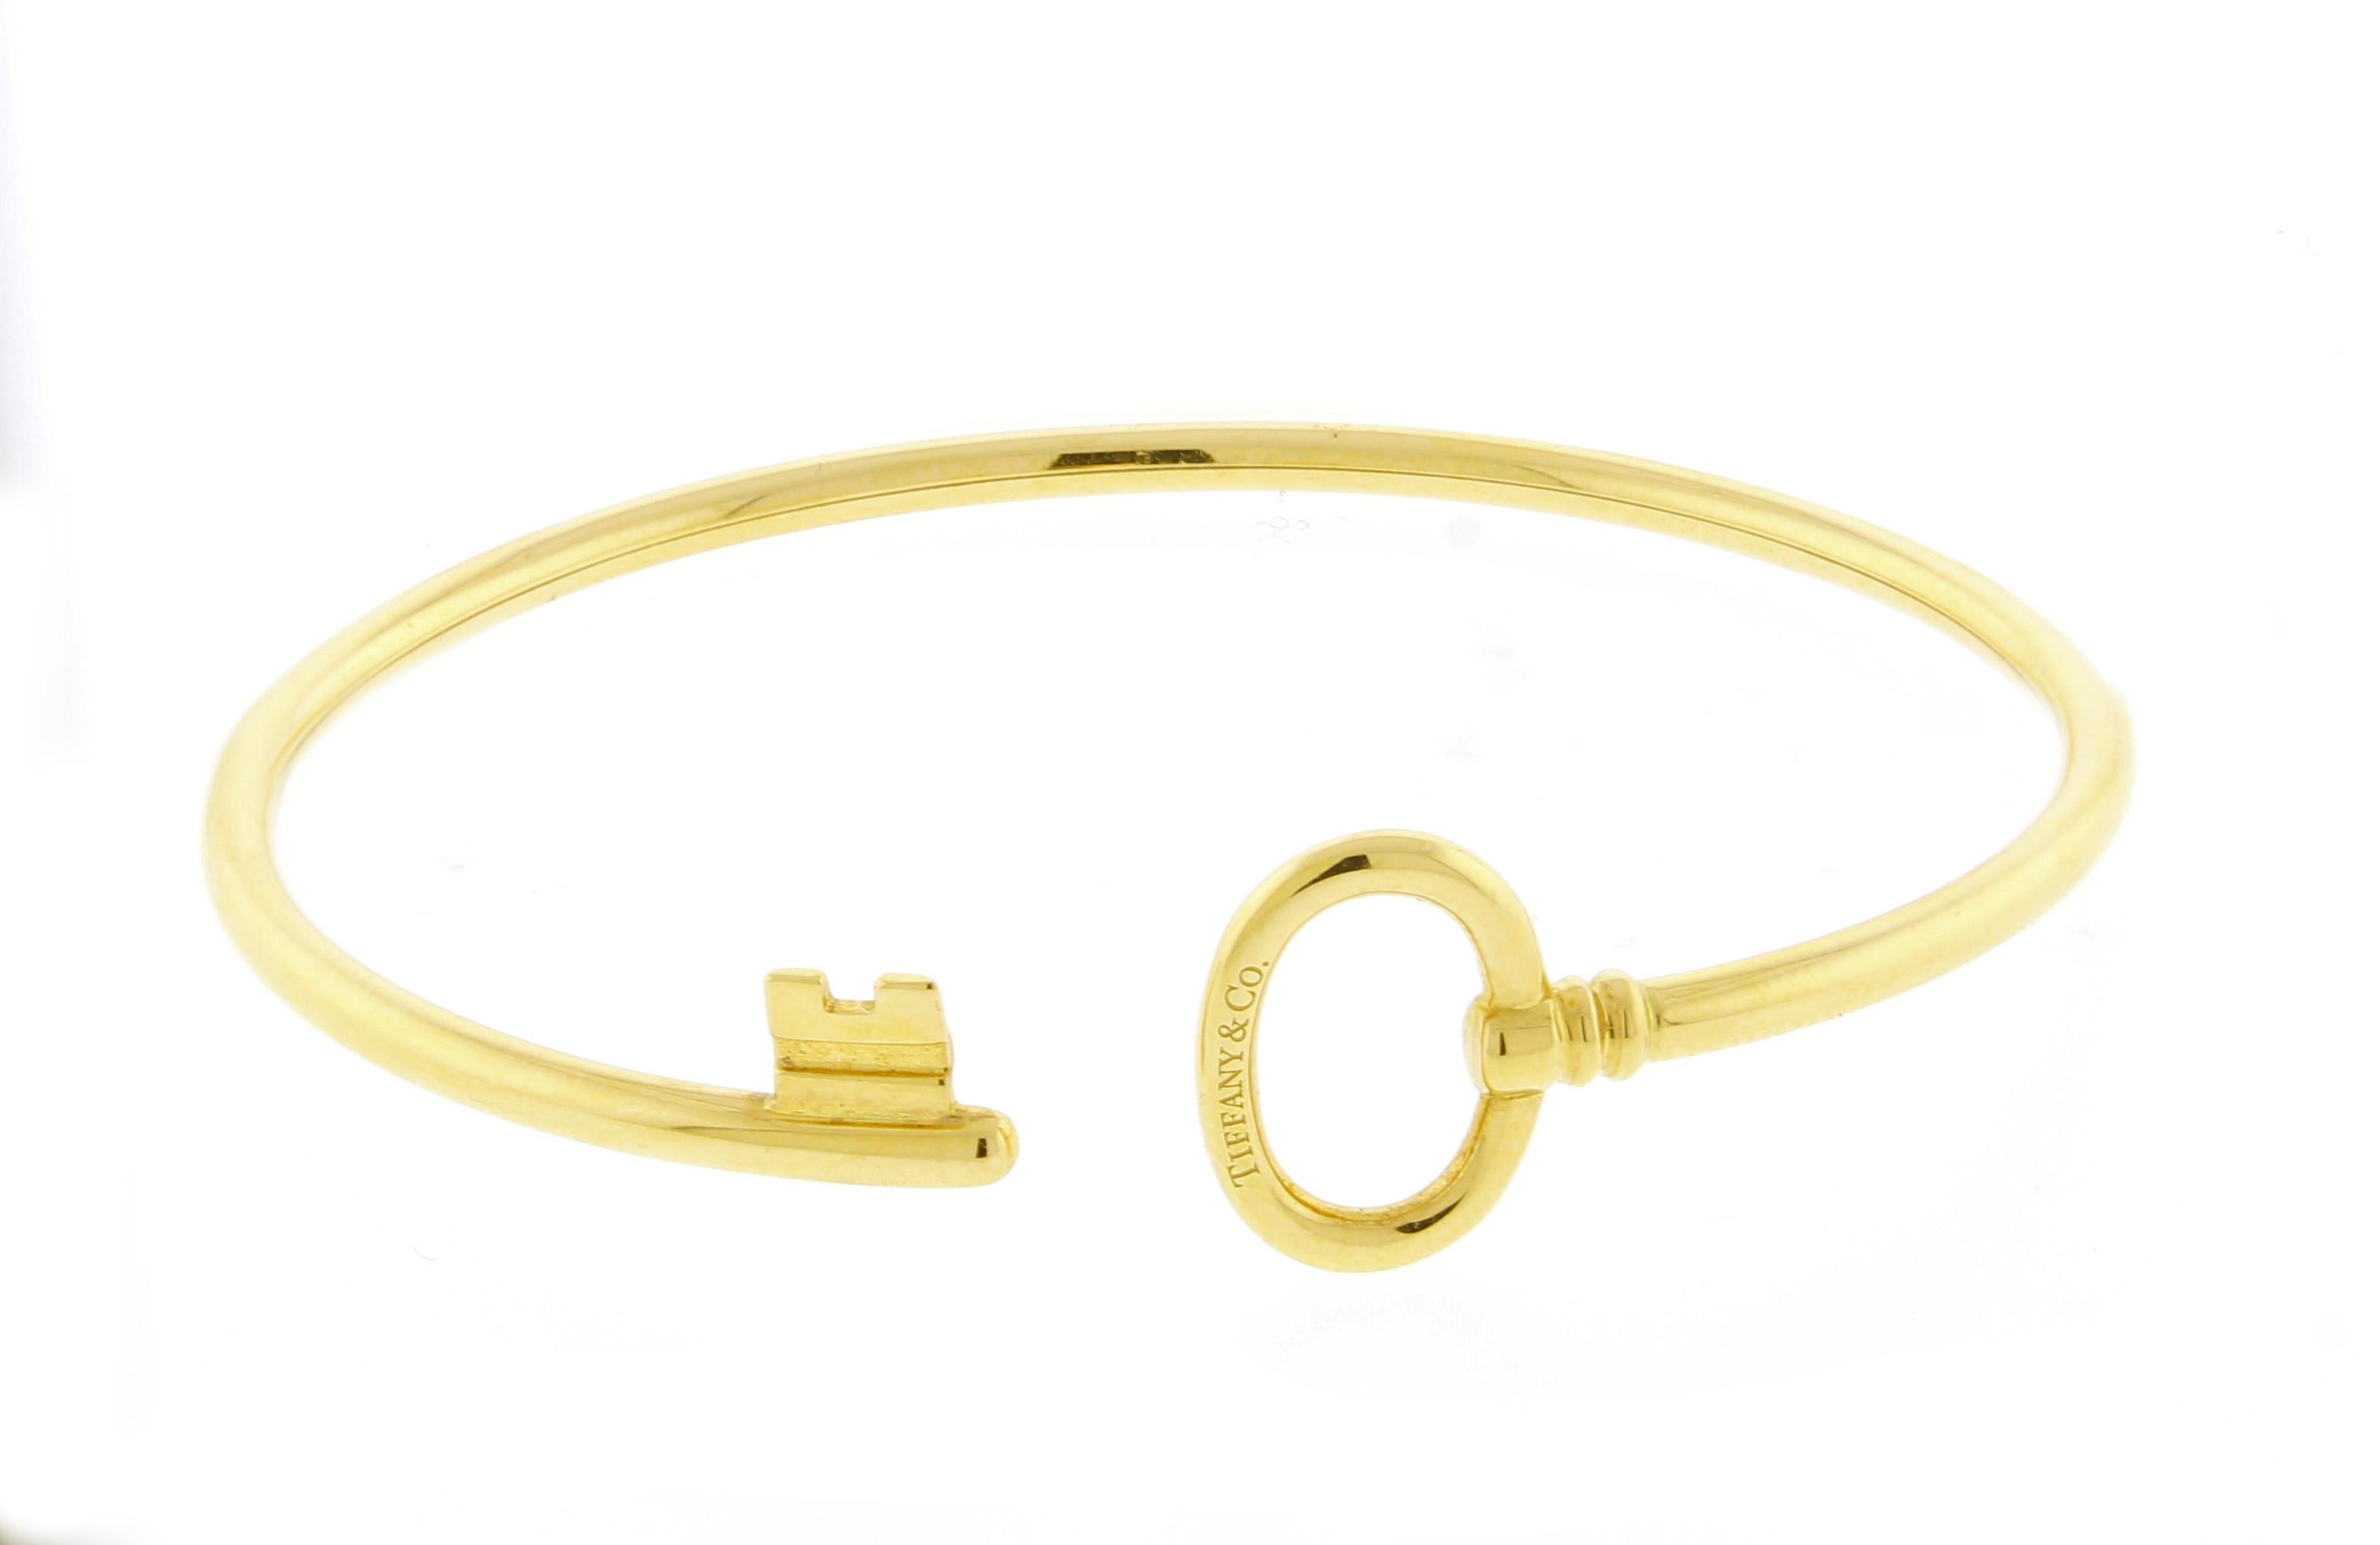 Brilliant beacons of optimism and hope, Tiffany Keys are radiant symbols of a bright future. A classic key circles the wrist in this modern and elegant design.

18 karat gold
Size medium
Fits wrists up to 6.25